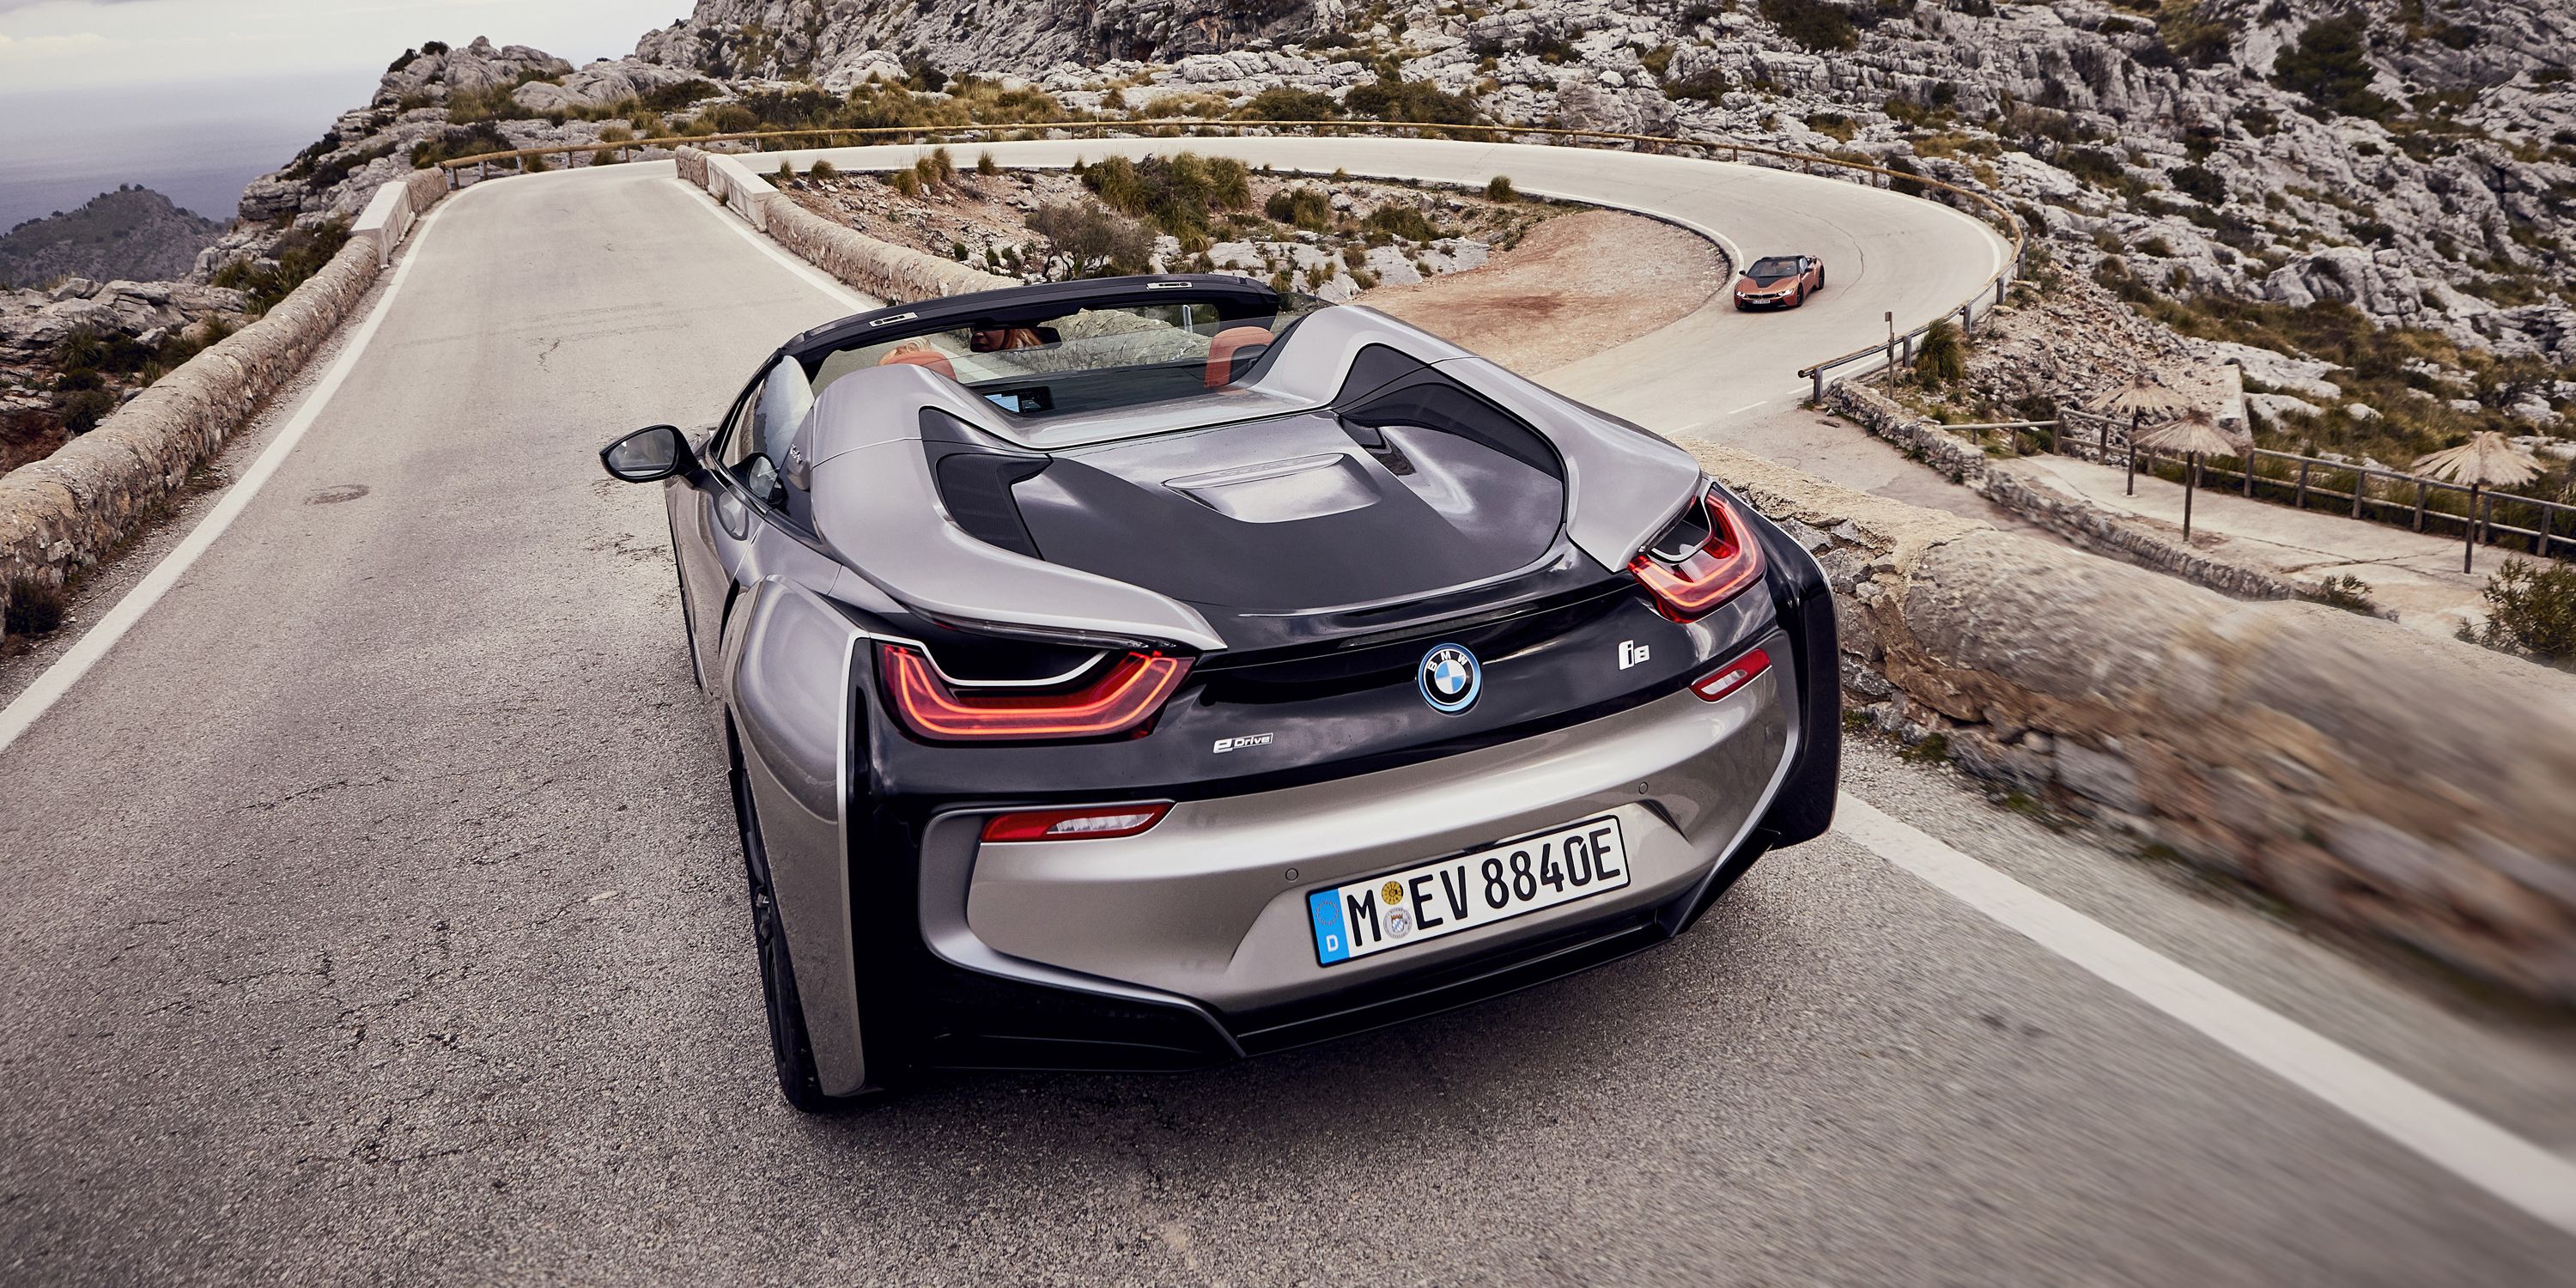 rommel Civic knoflook The Most Impressive Part of the BMW i8 Roadster Is How It's Made